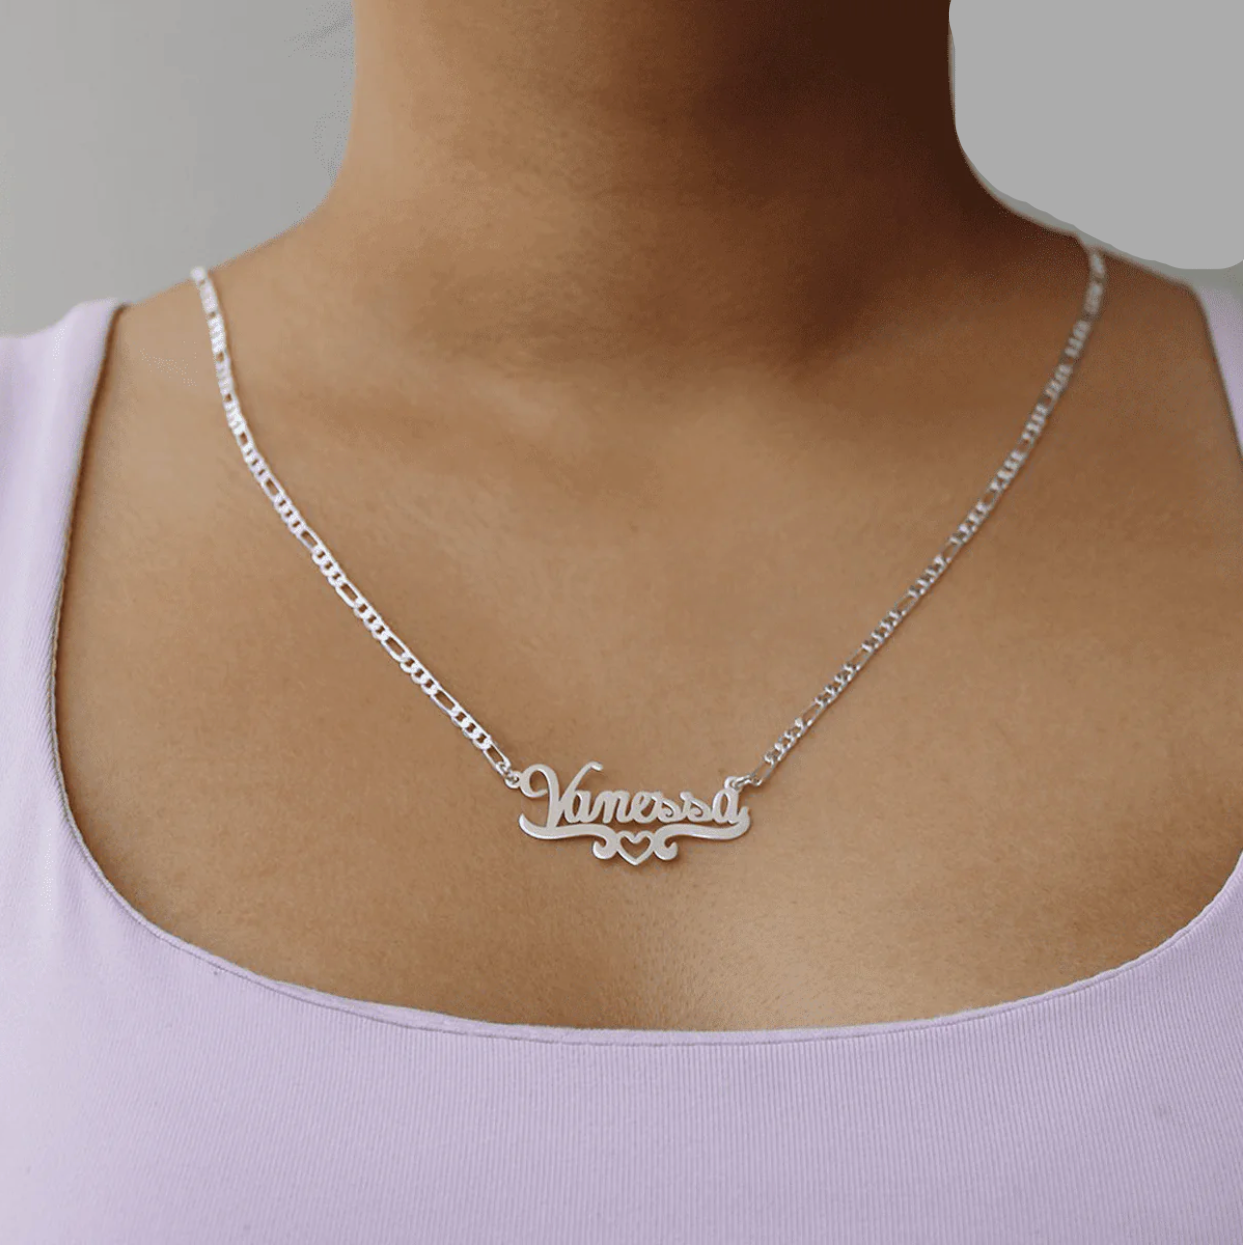 925 Sterling Silver Personalized Heart Name Necklace